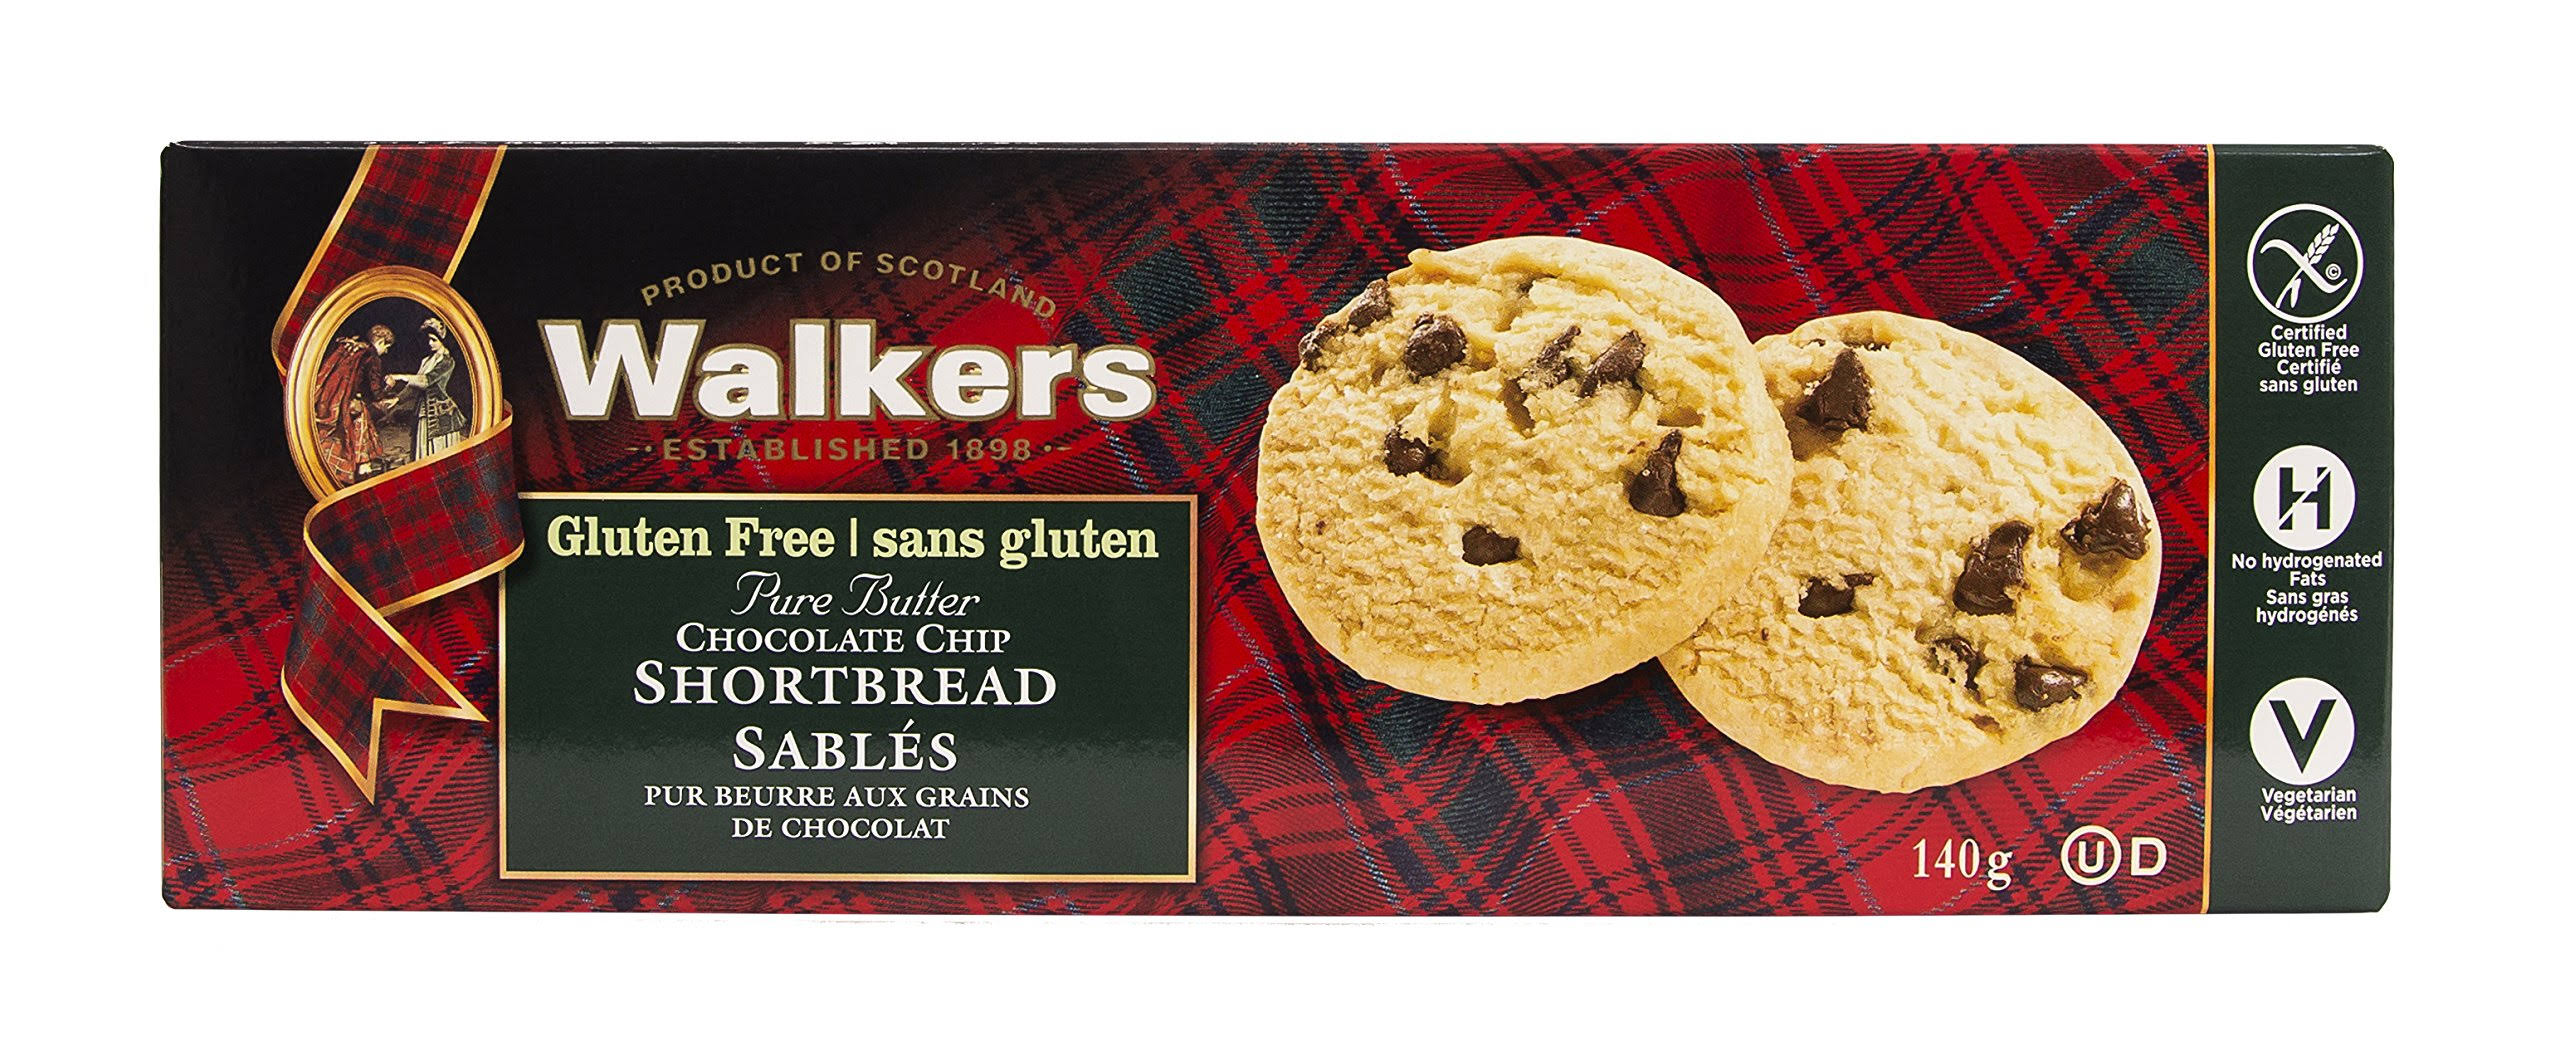 Walkers Gluten Free Pure Butter Shortbread - Chocolate Chip, 140g